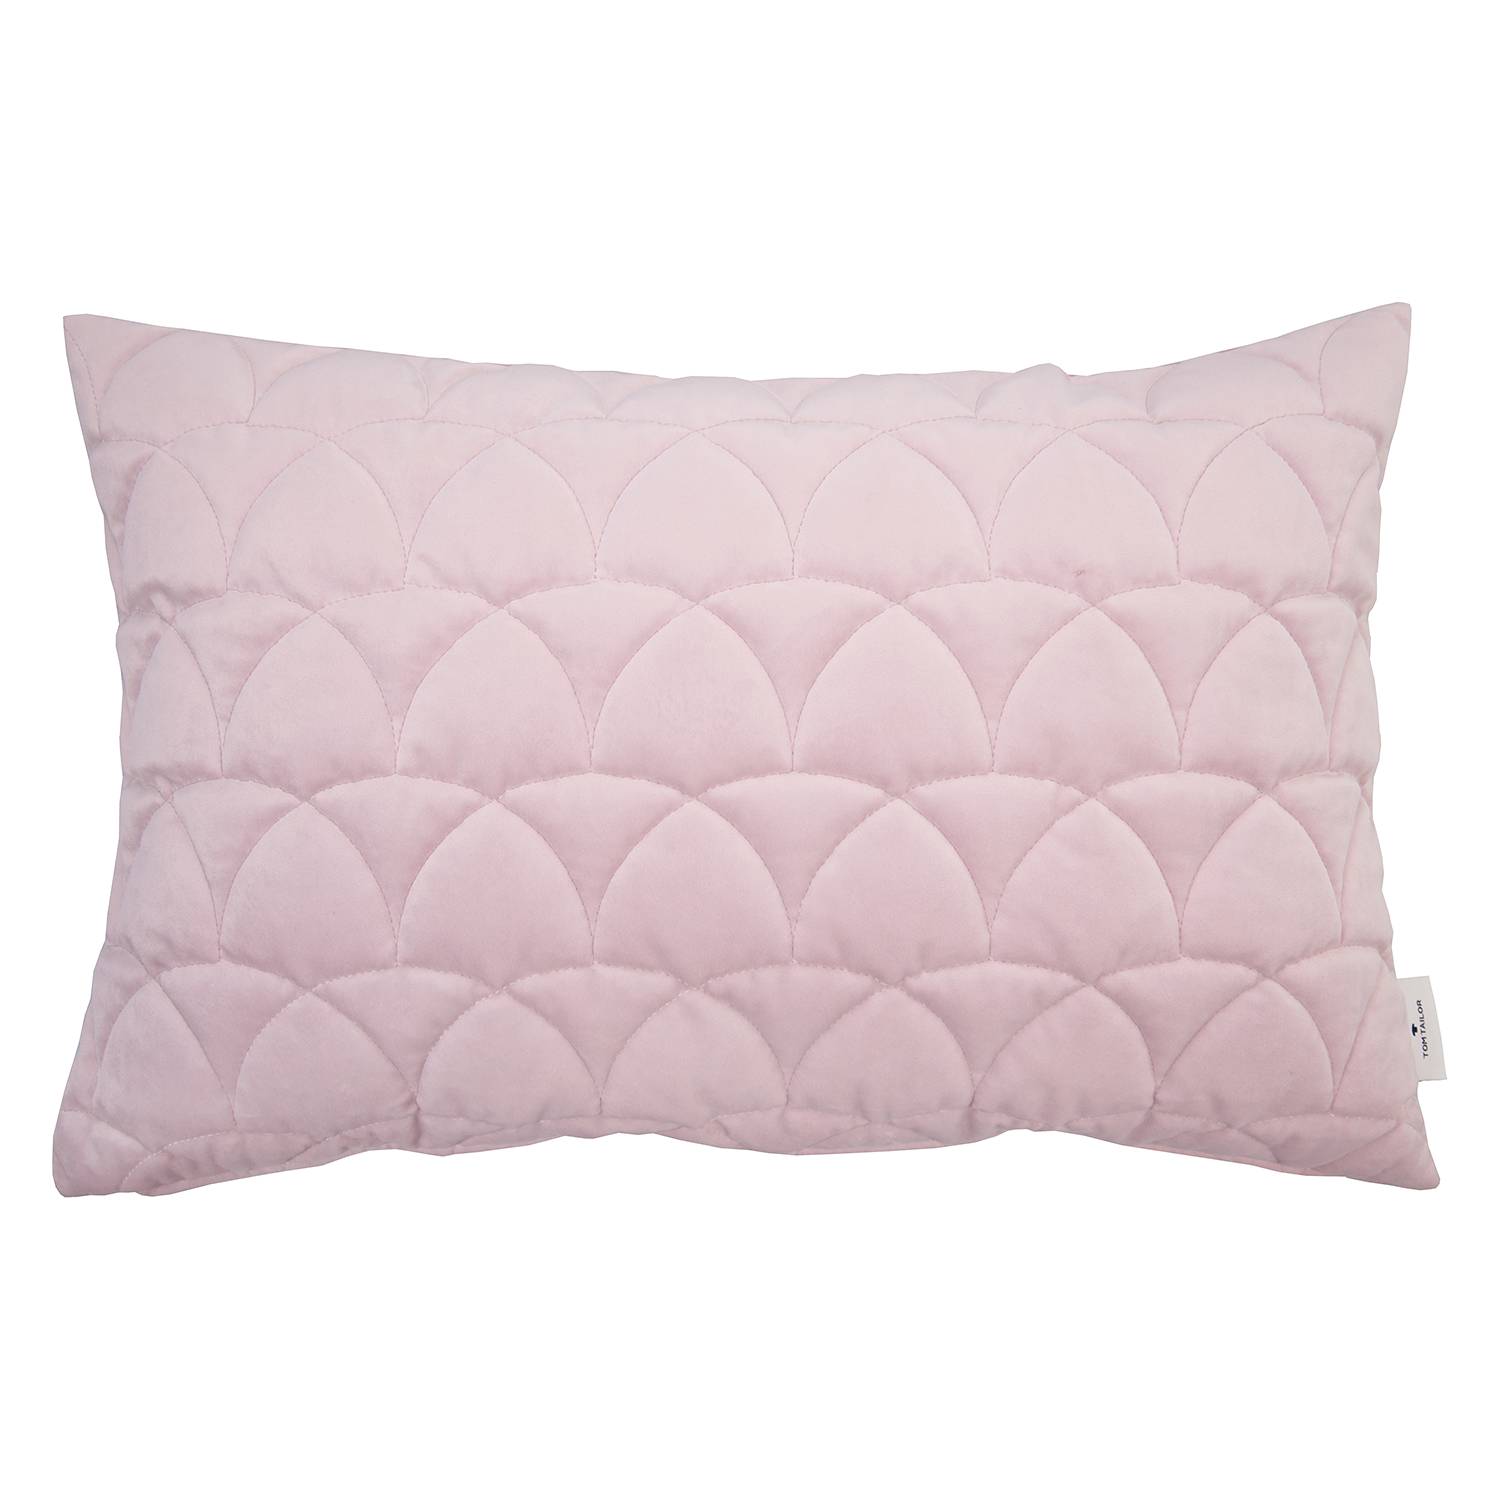 Home24 Kussensloop T-Quilted Seashell, Tom Tailor